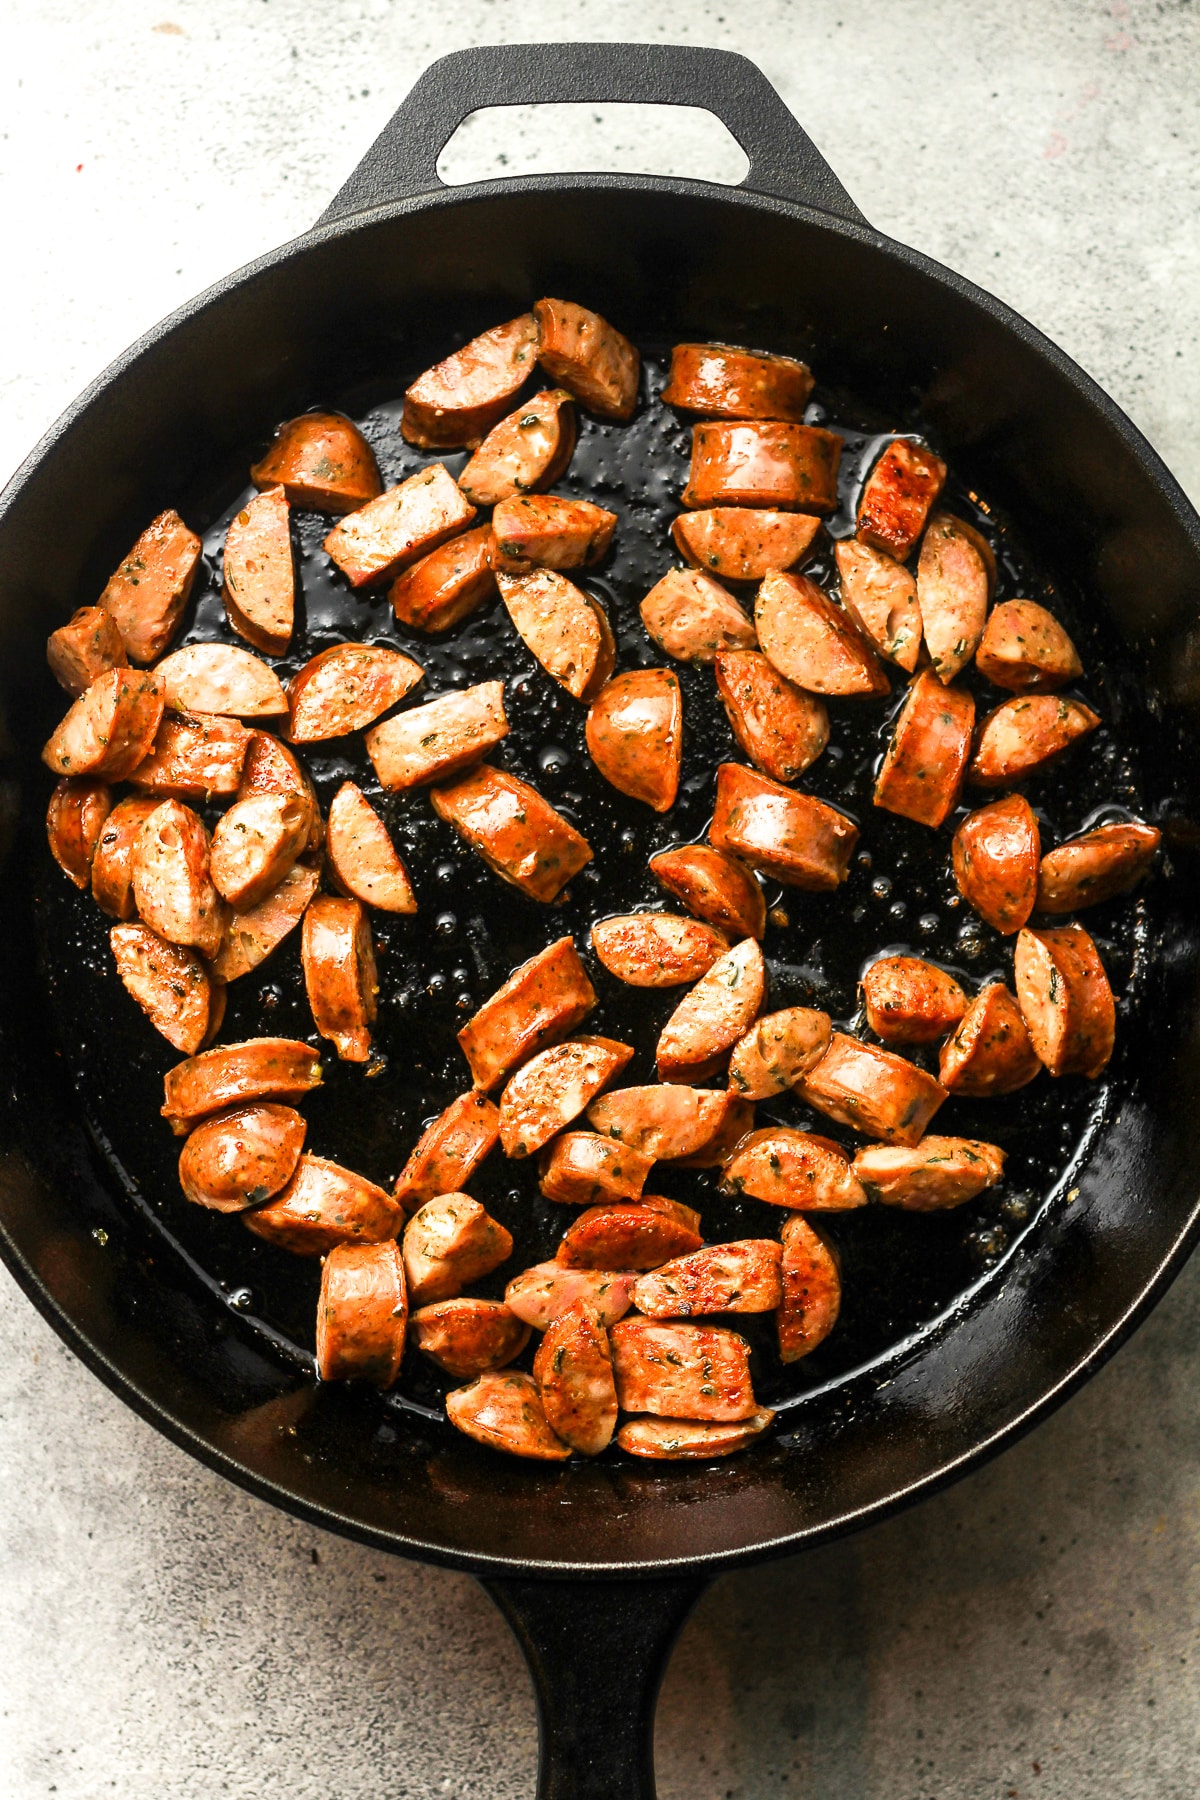 A skillet of the browned chicken sausage.